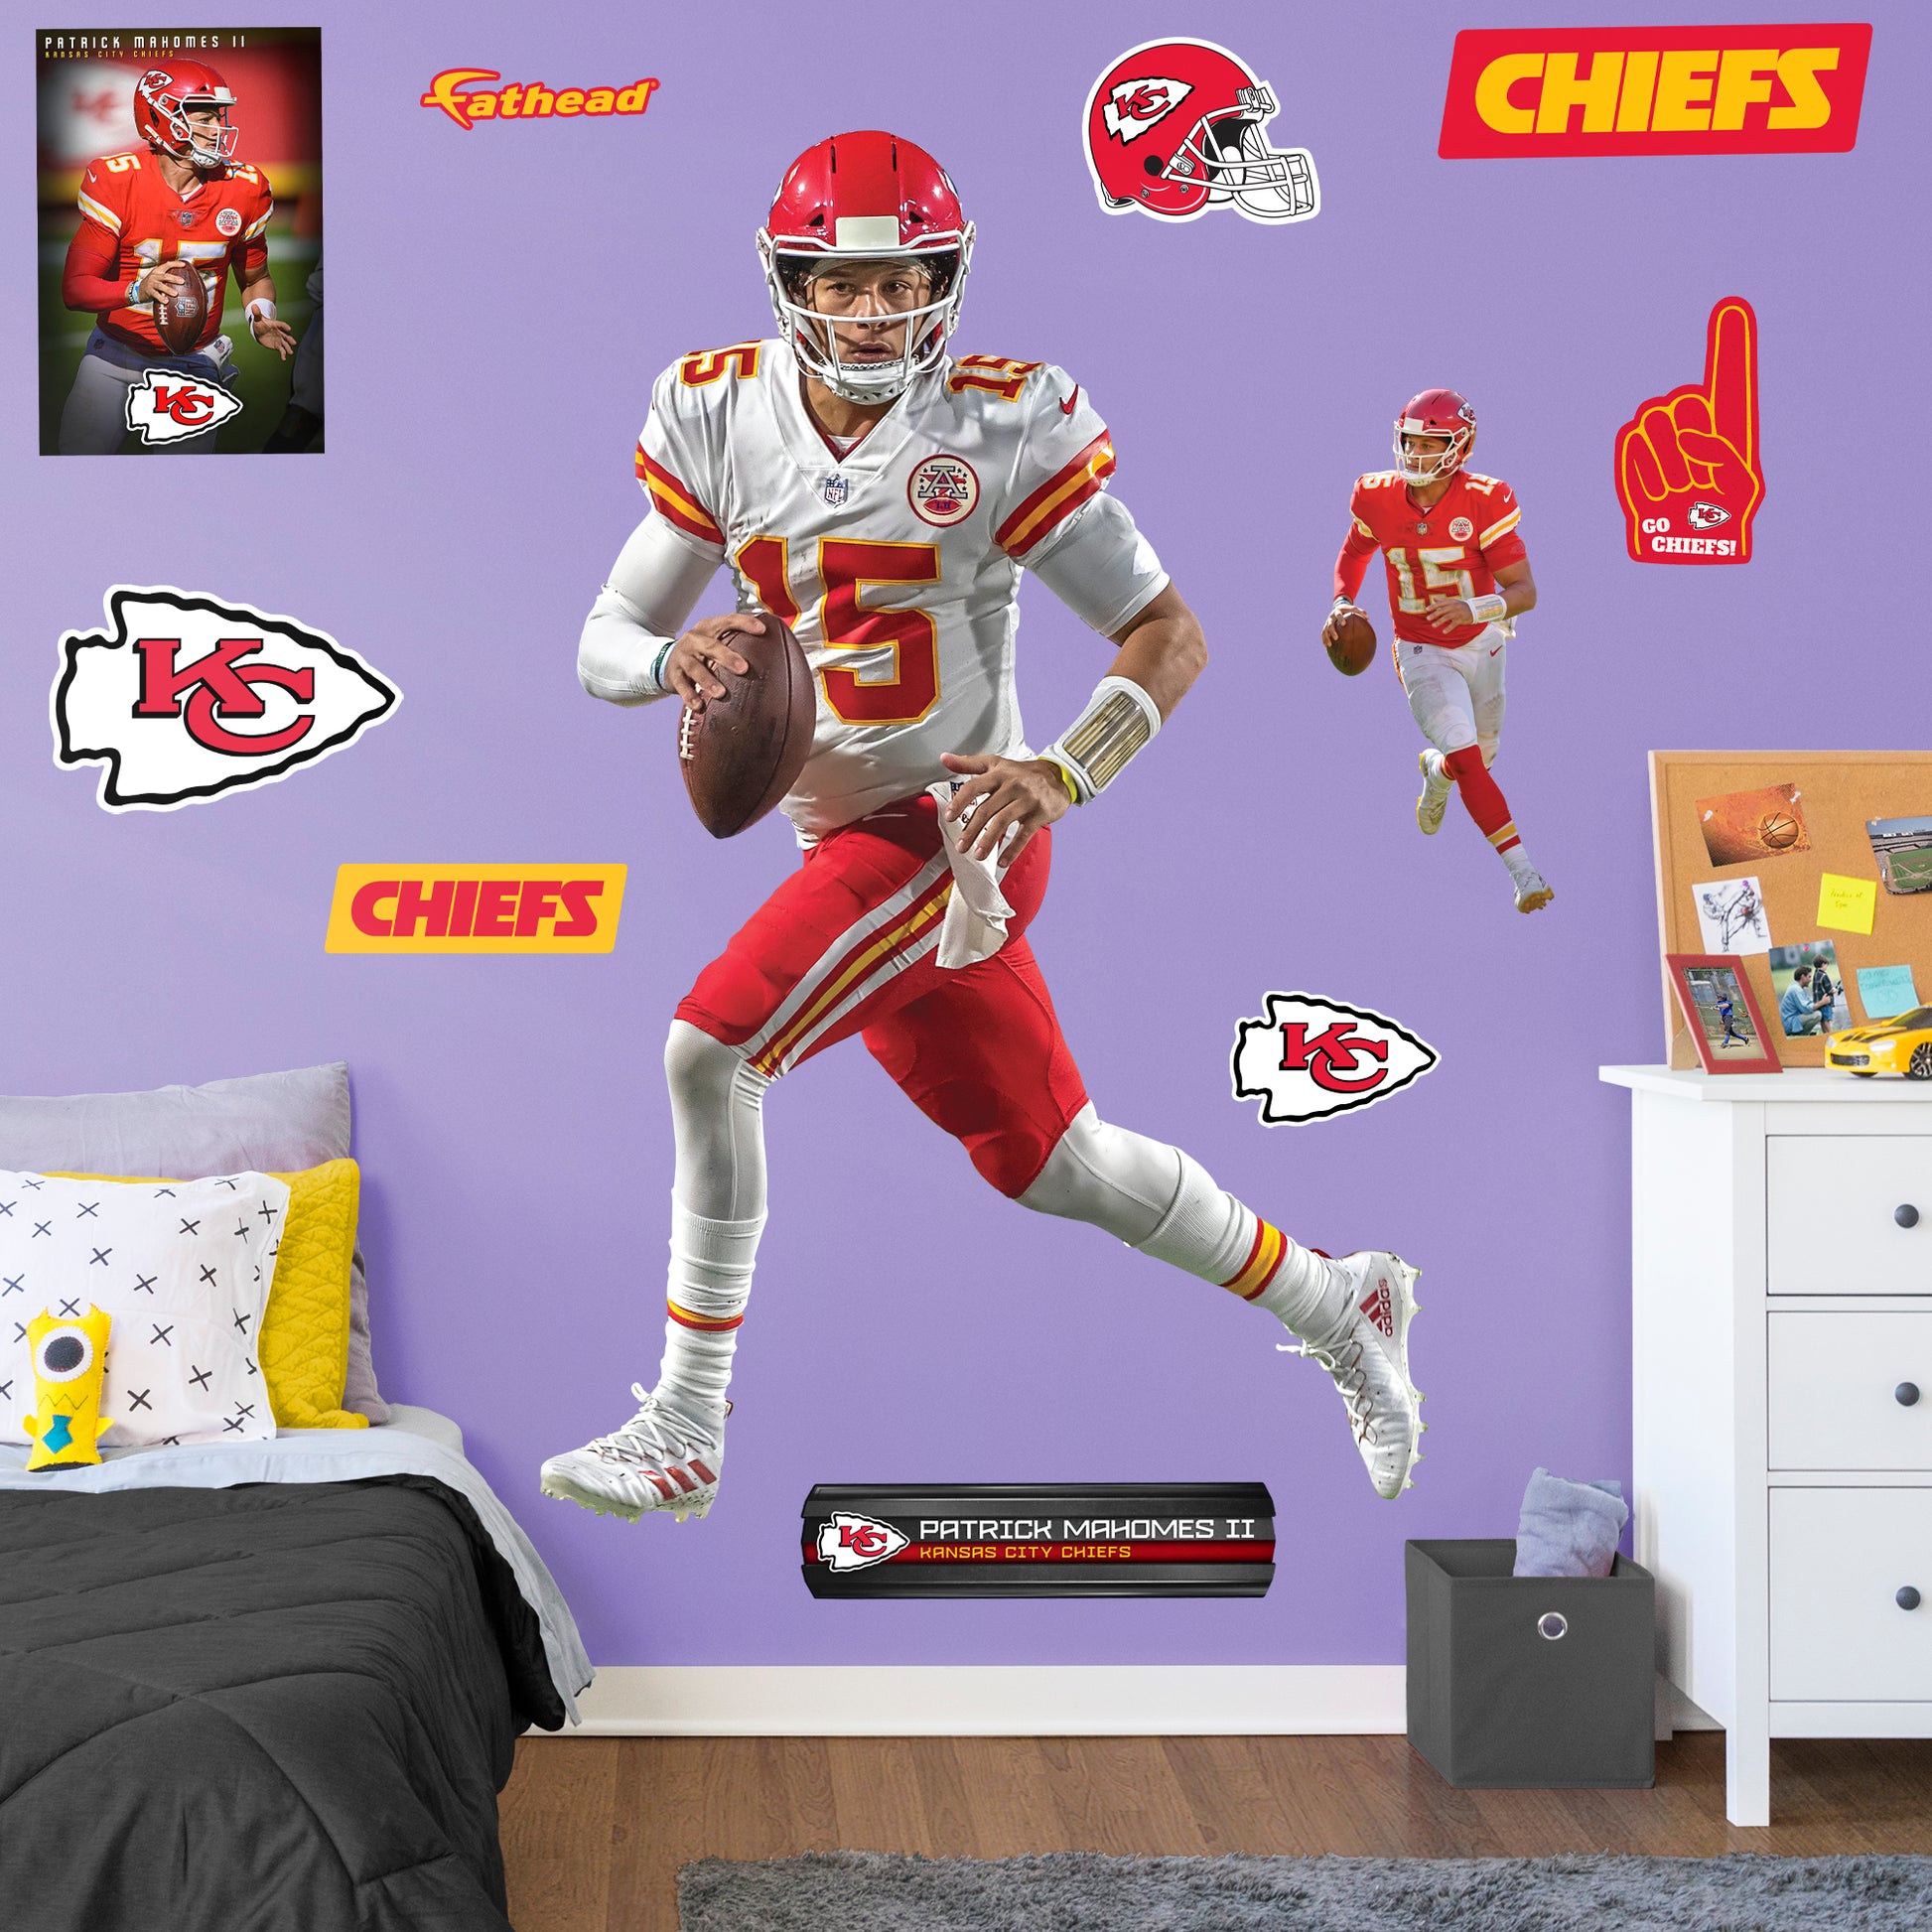 Patrick Mahomes II 2020 White Jersey - NFL Removable Wall Decal Life-Size Athlete + 10 Wall Decals 47W x 74H